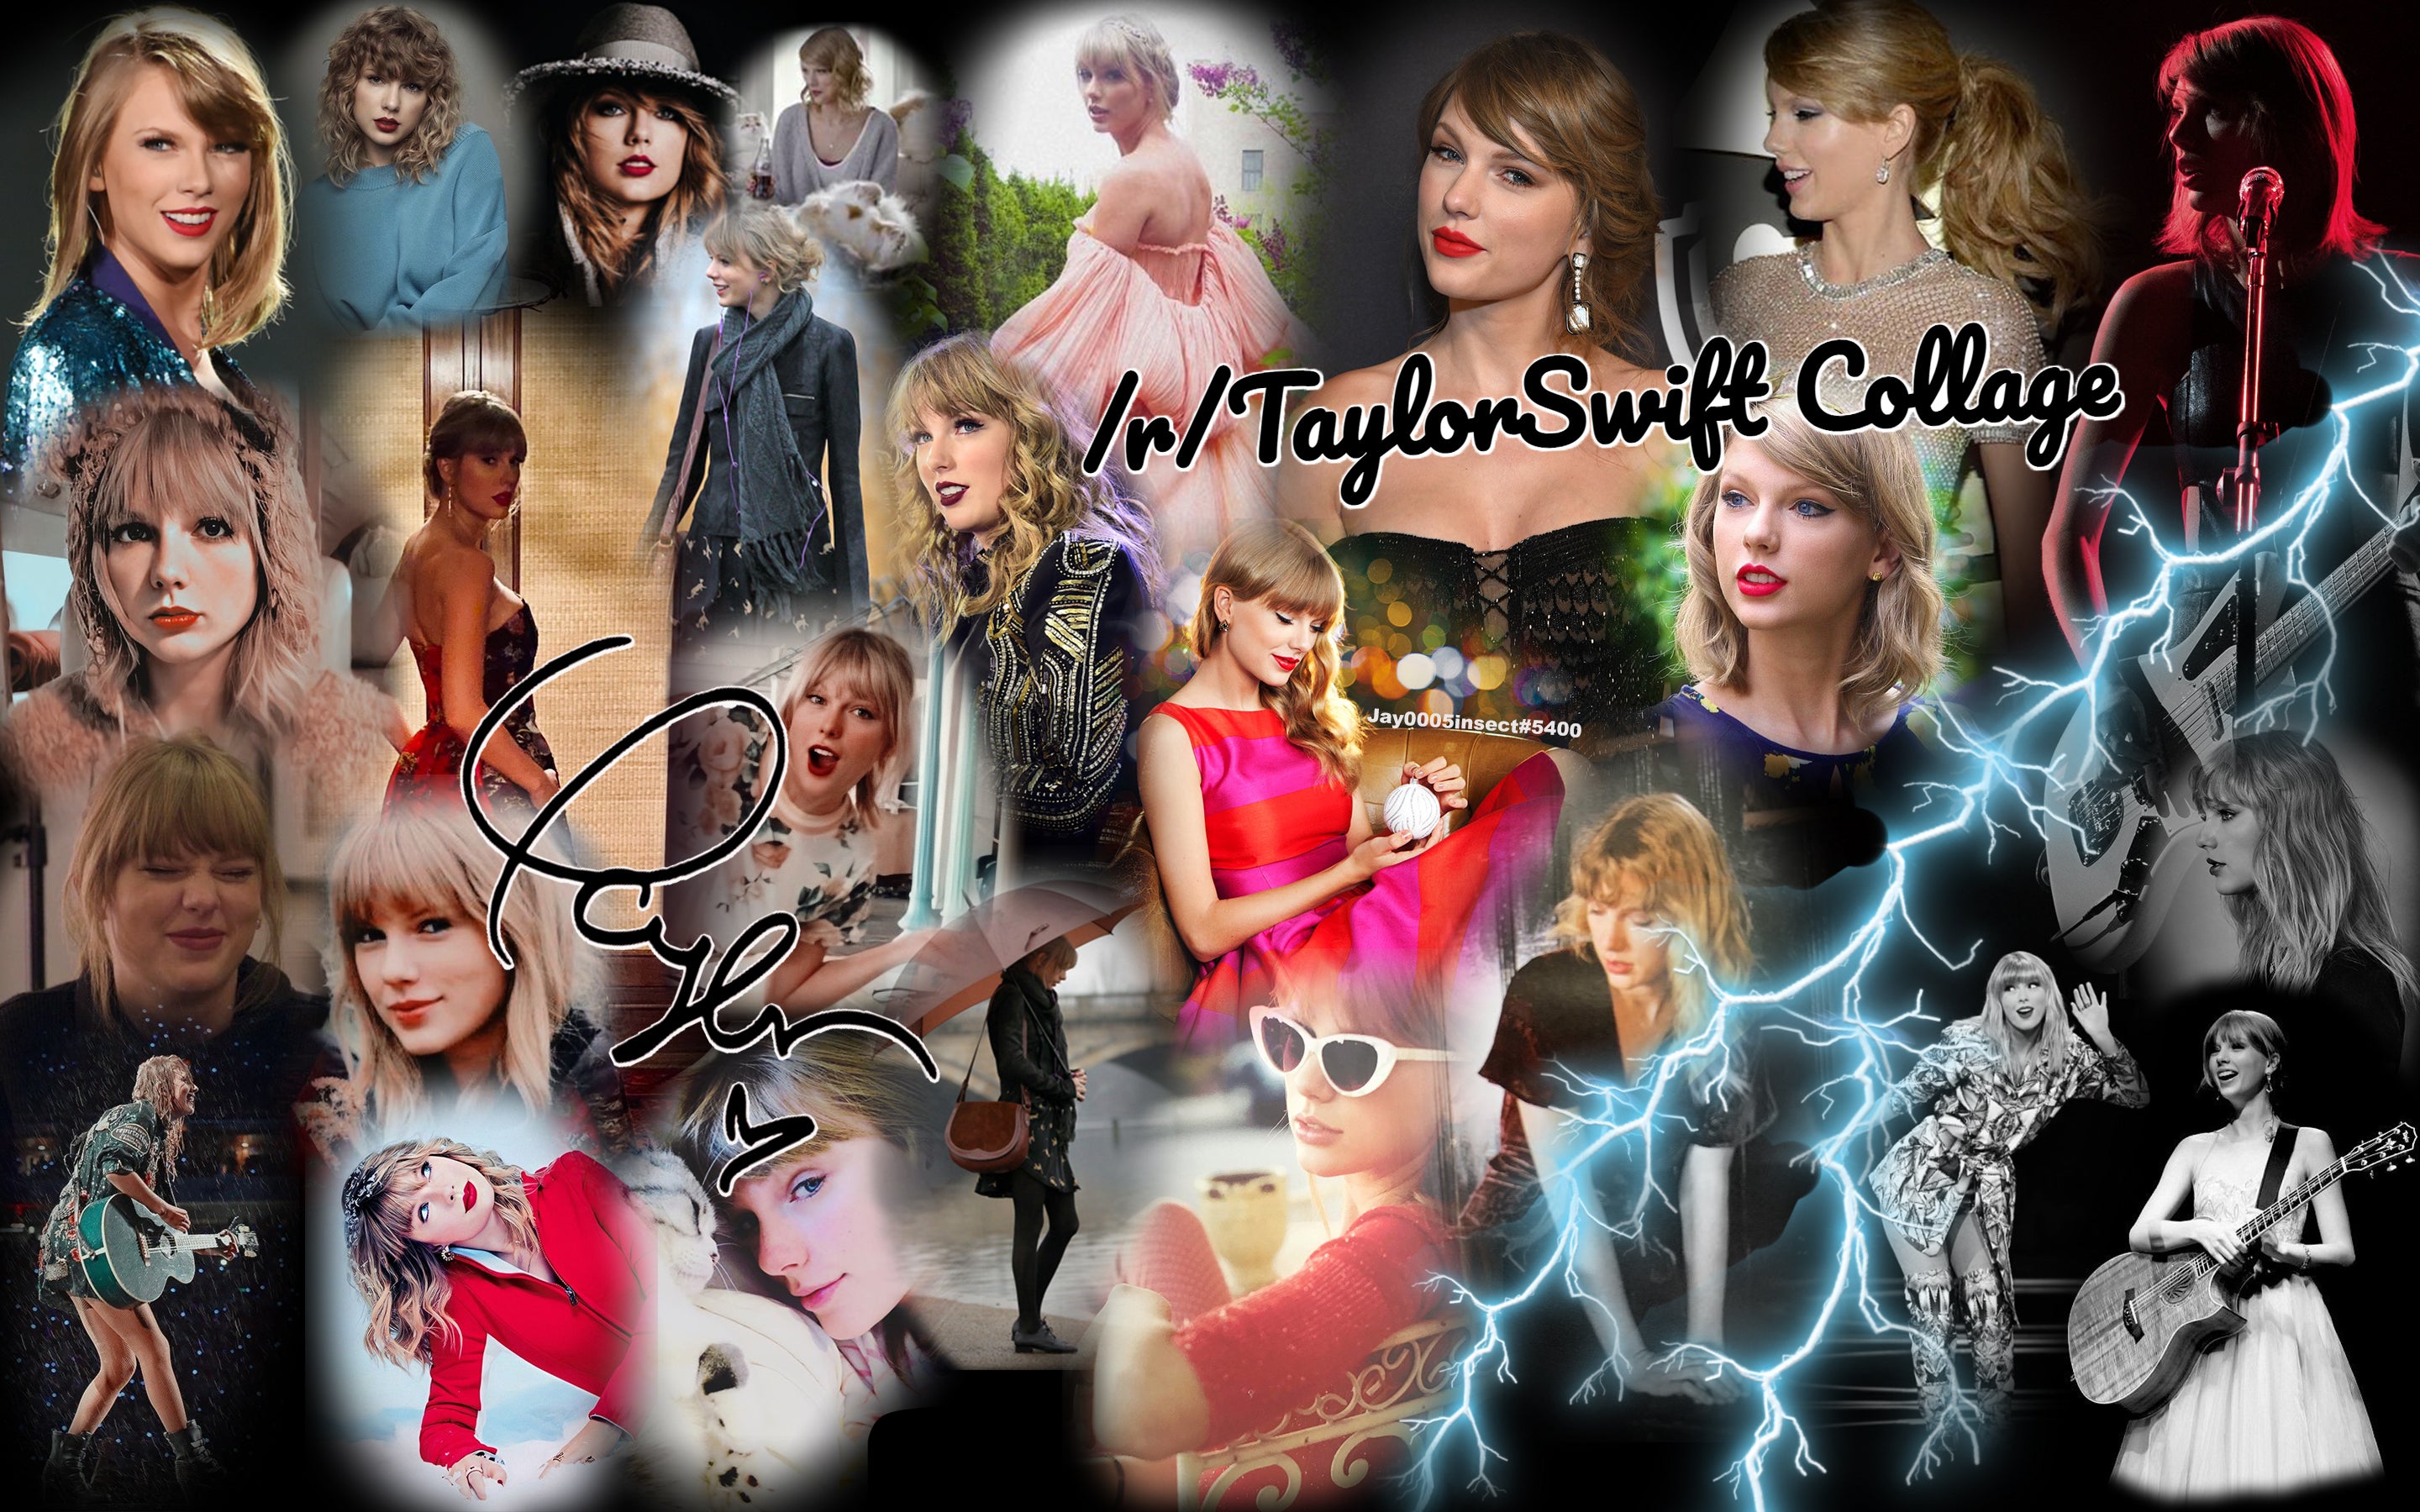 Collagewallpaper made from rtaylorswift discords favourite tay pictures rtaylorswiftpictures